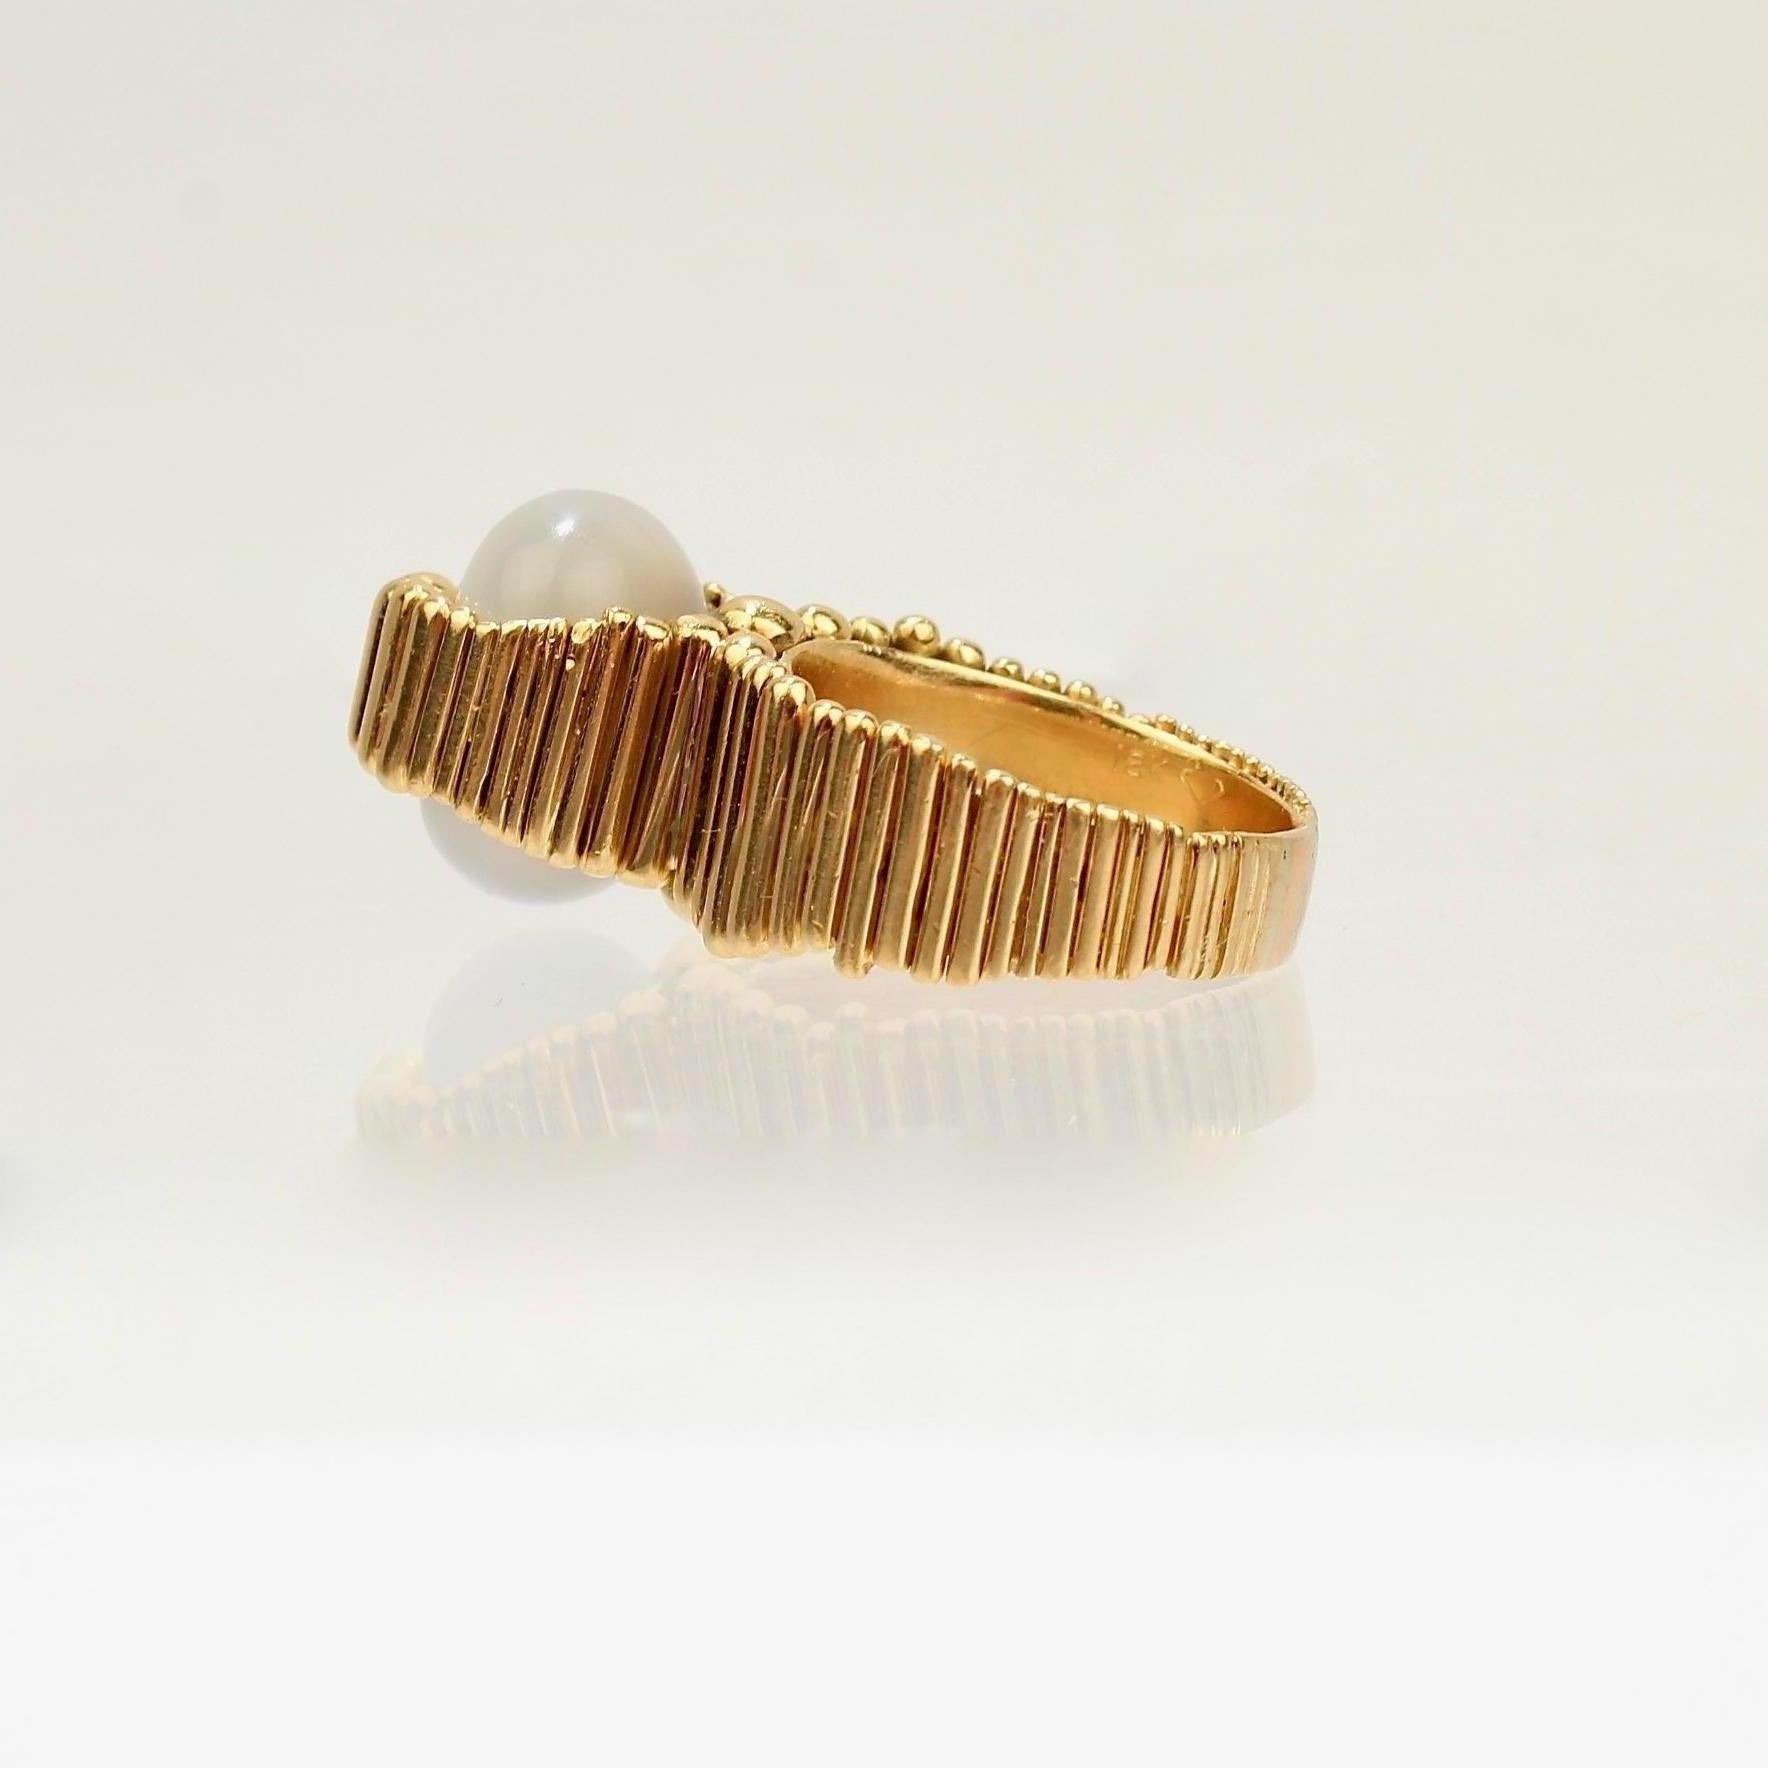 Modernist Signed Space Age 18 Karat Gold and Moonstone Cocktail Ring by F. J. Cooper